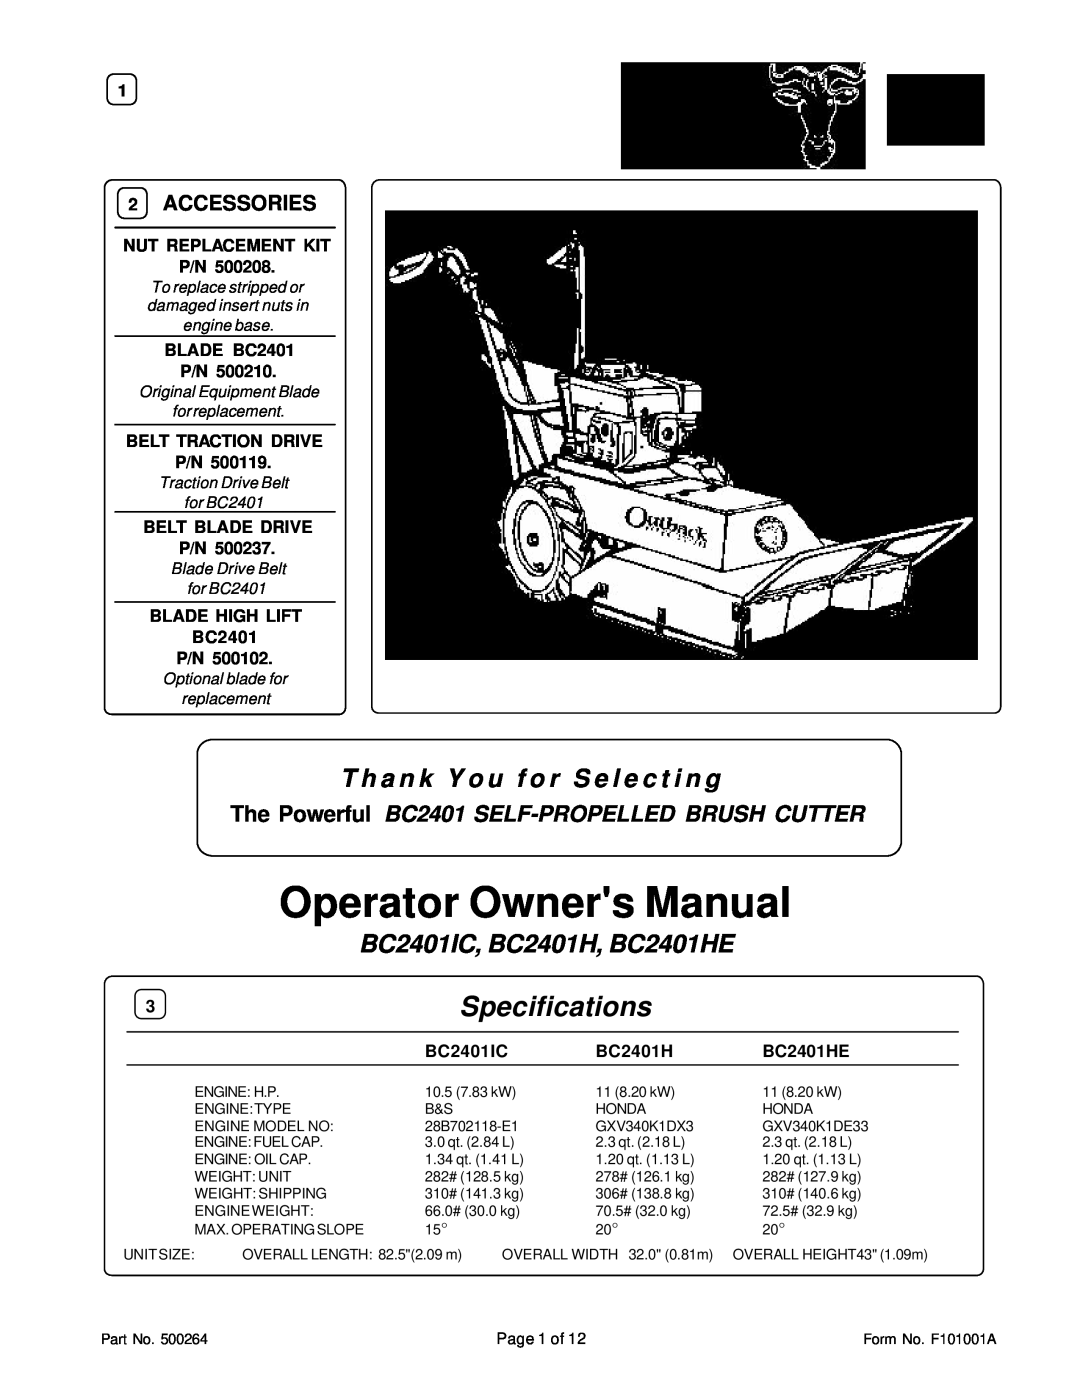 Honda Power Equipment owner manual BC2401IC, BC2401H, BC2401HE, Accessories, Nut Replacement Kit P/N, BLADE BC2401 P/N 